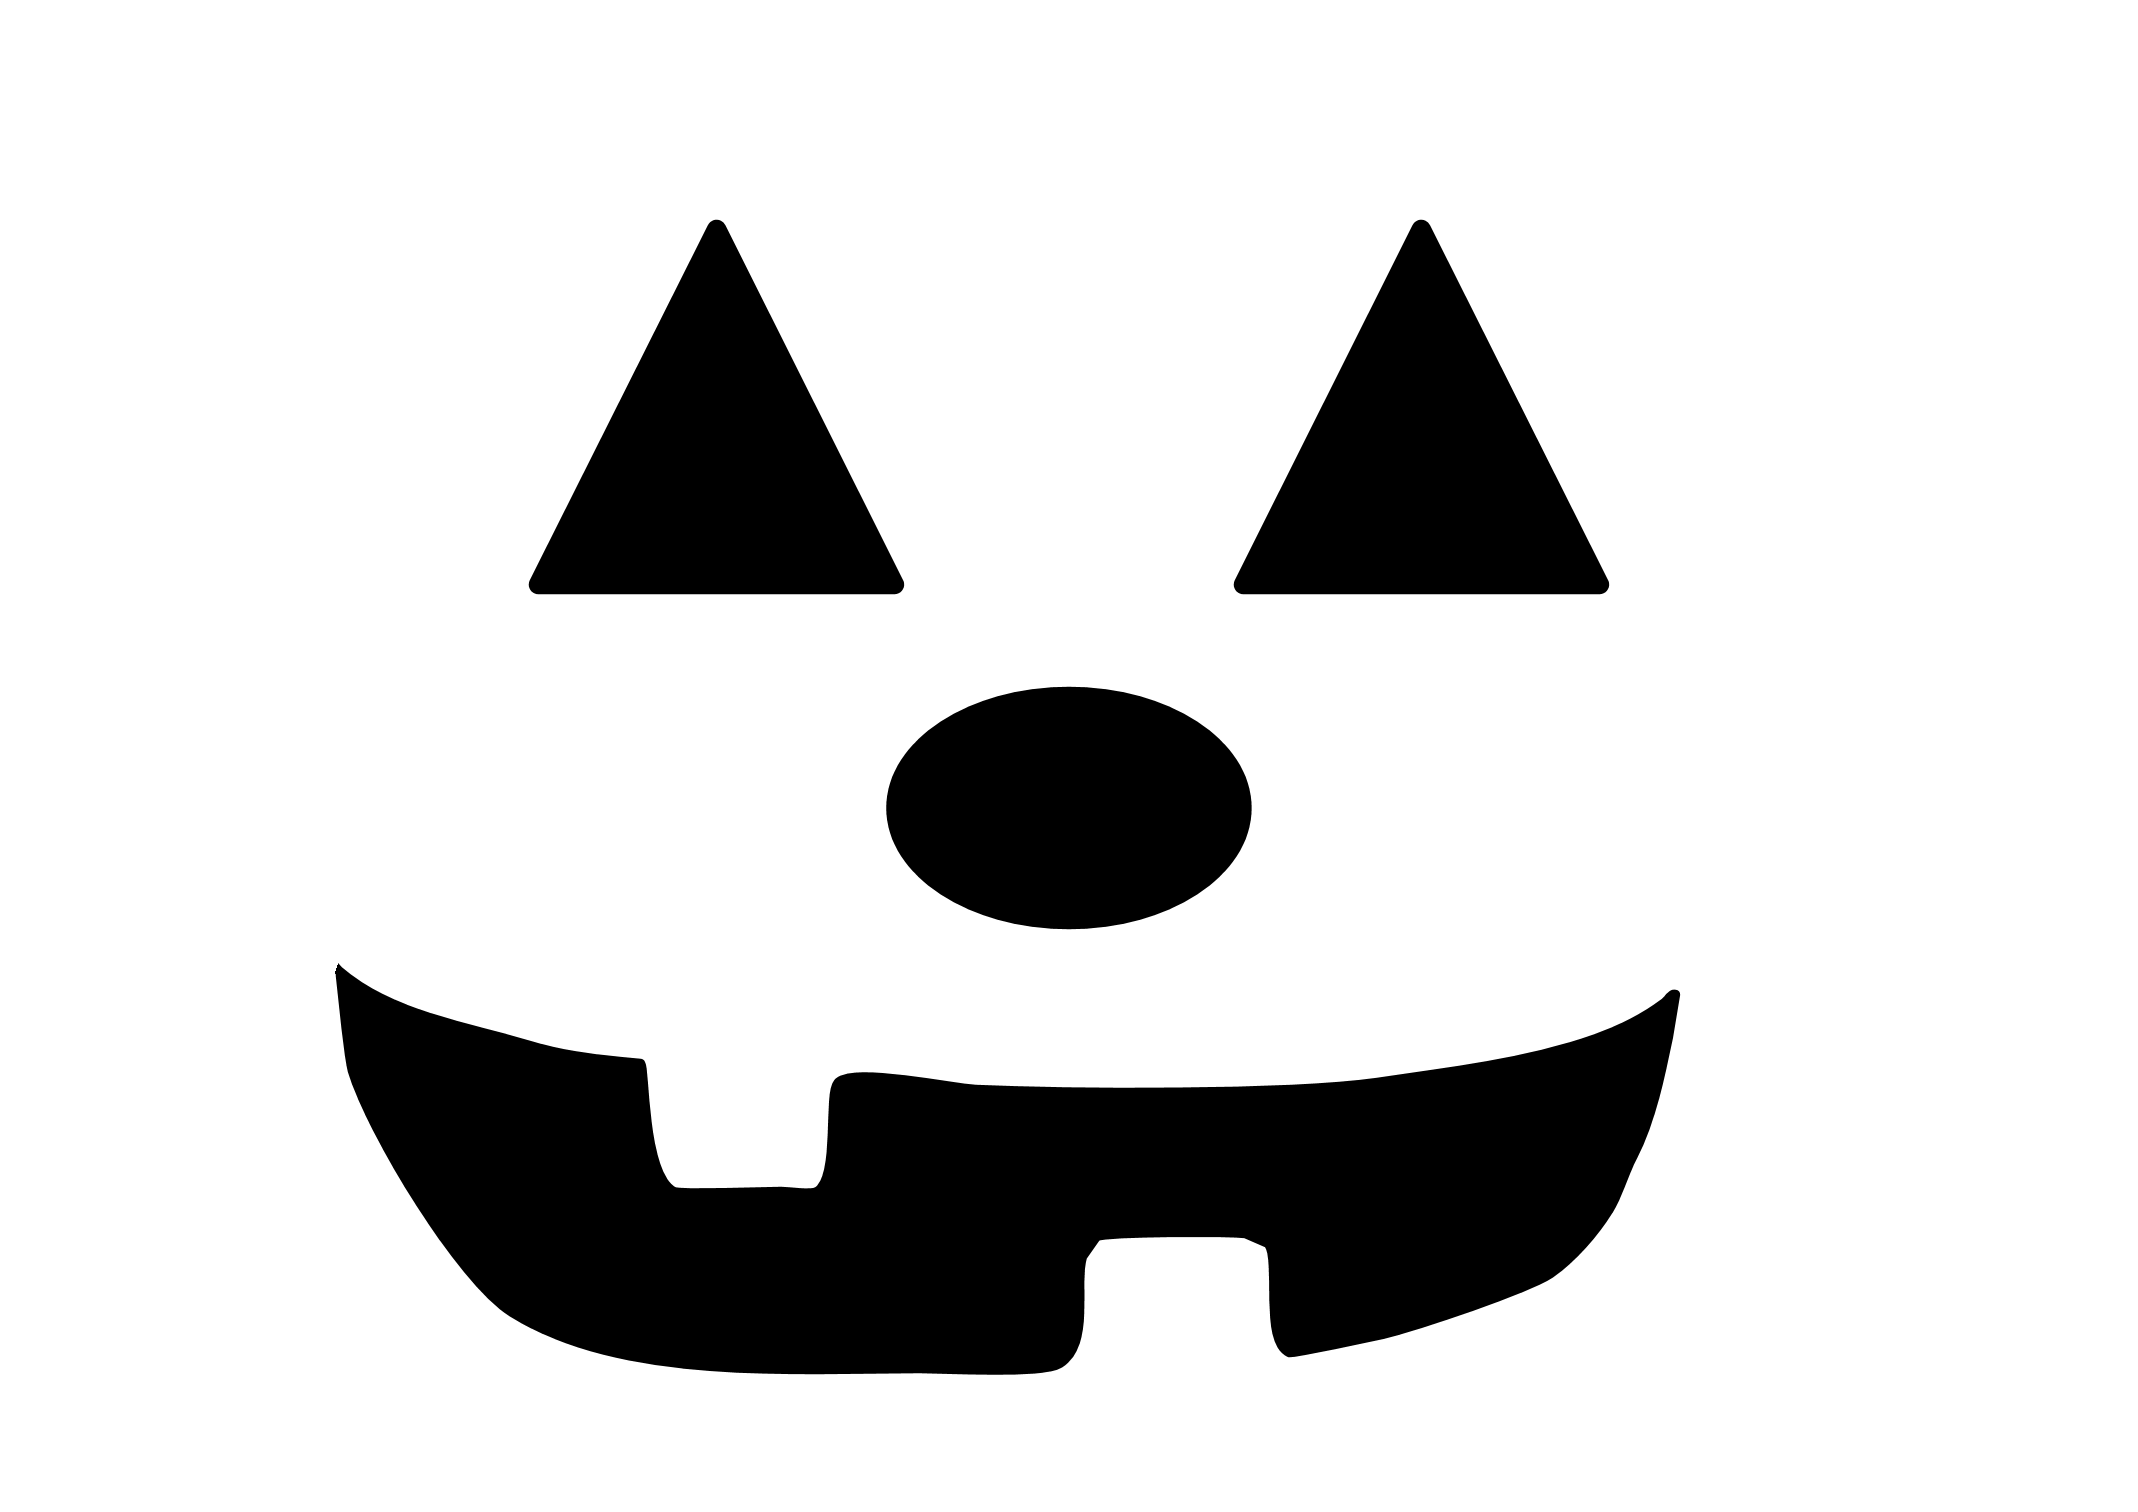 100 Awesome Free Pumpkin Carving Patterns For Halloween 